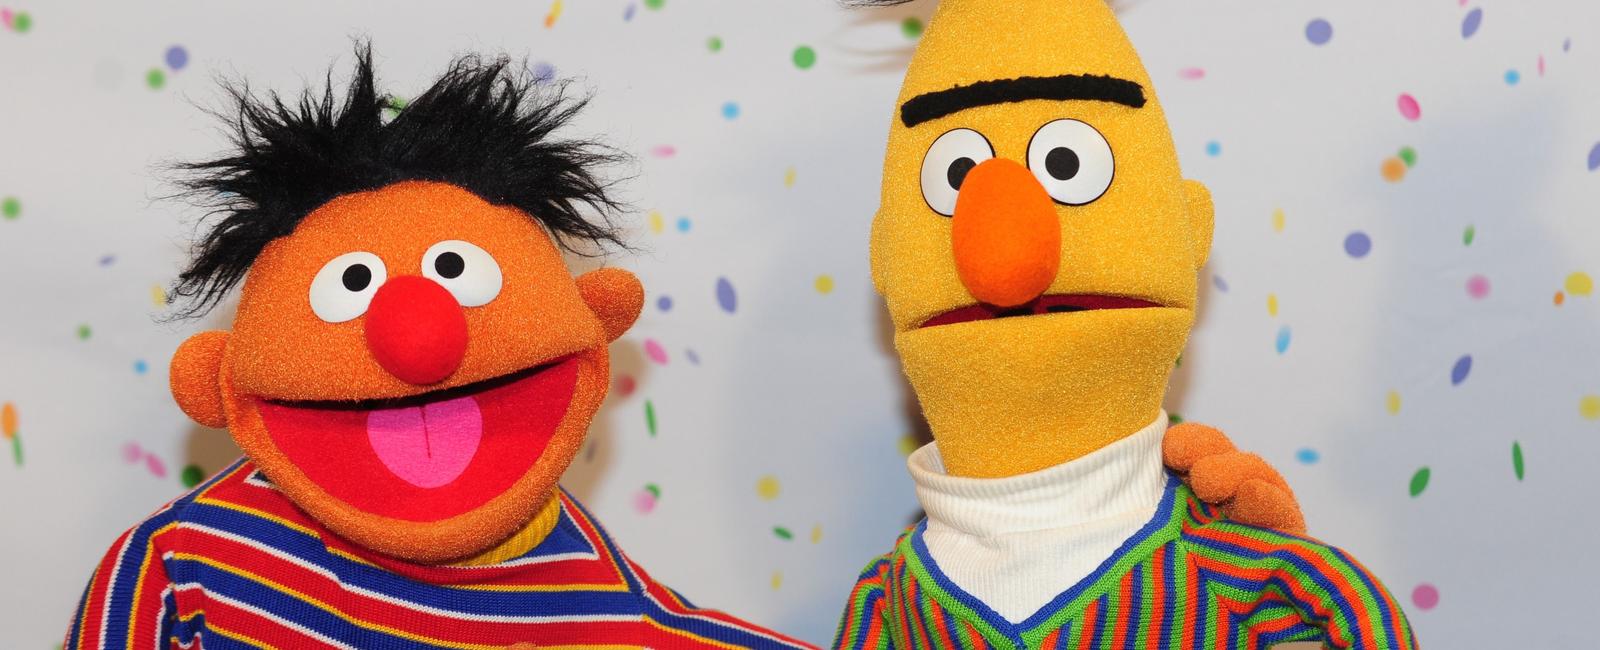 The characters bert and ernie on sesame street were named after bert the cop and ernie the taxi driver in frank capra s it s a wonderful life